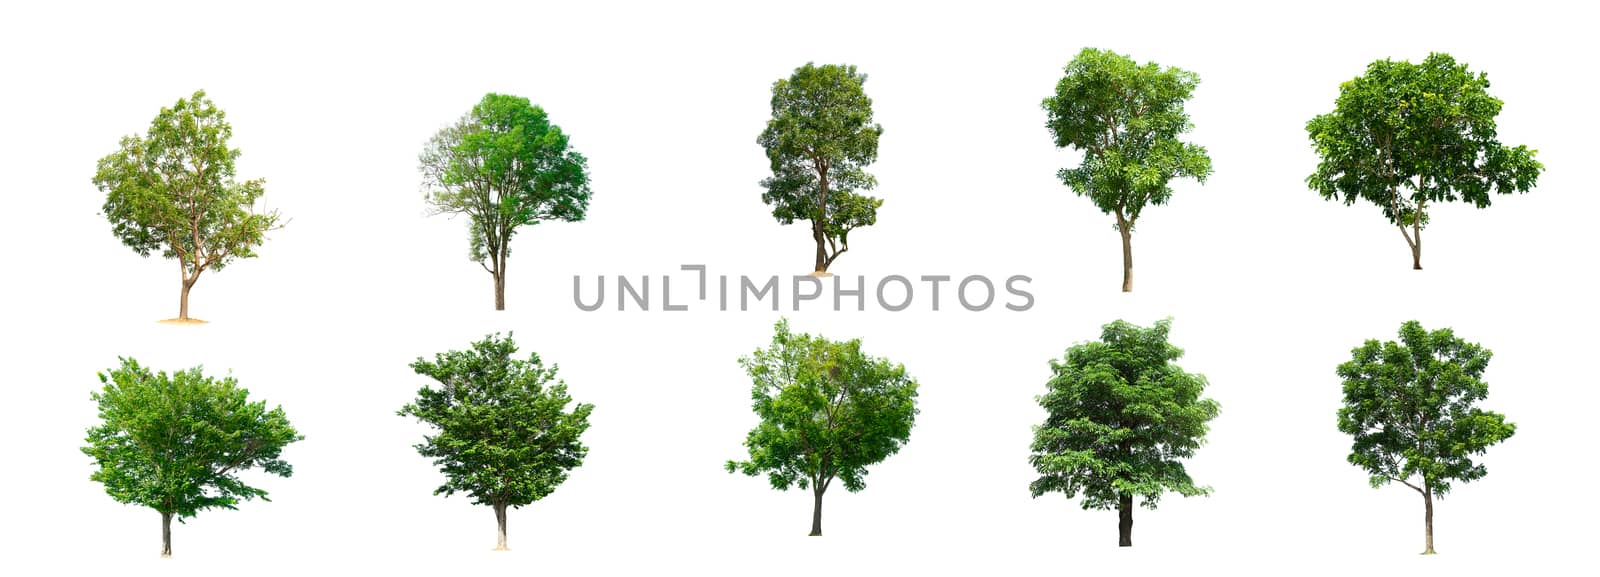 The collection of trees isolated trees on white background by sompongtom